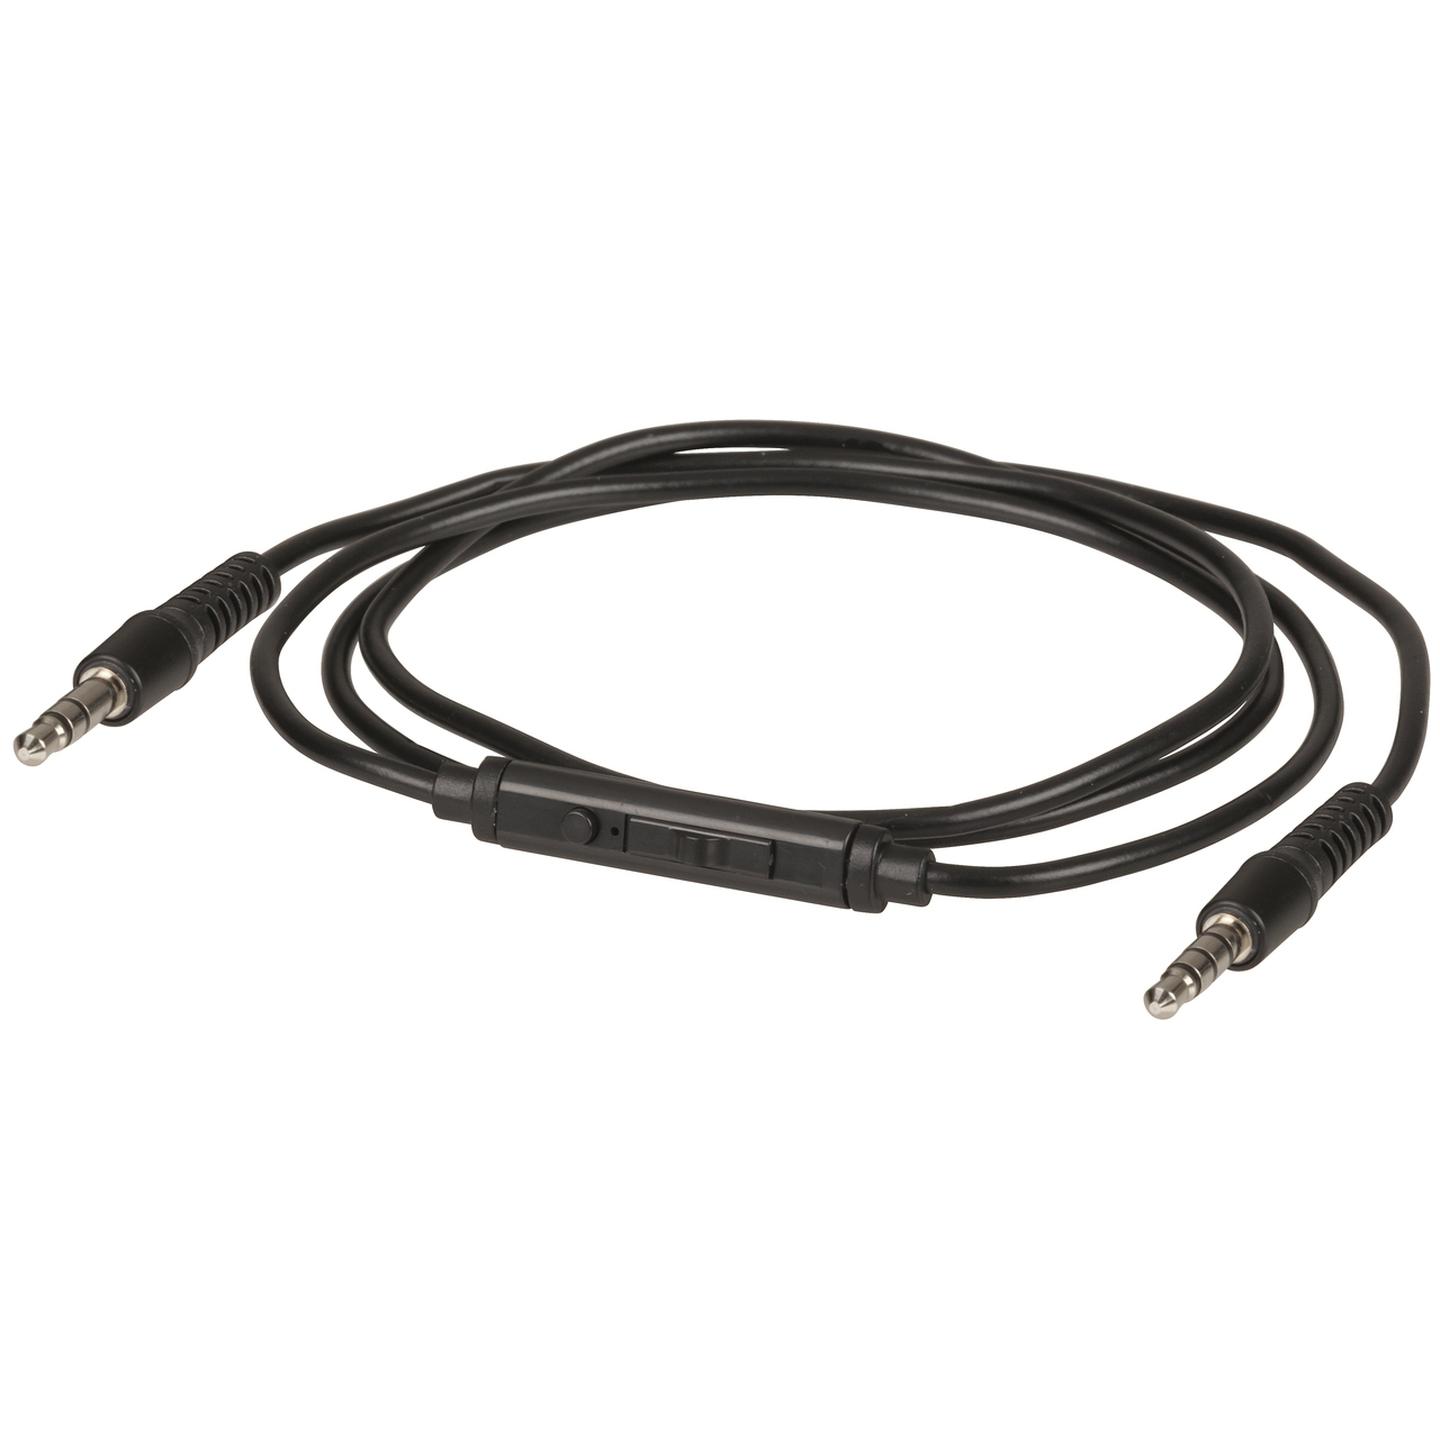 3.5mm Plug to Plug Cable with Microphone and Volume Control - 1m